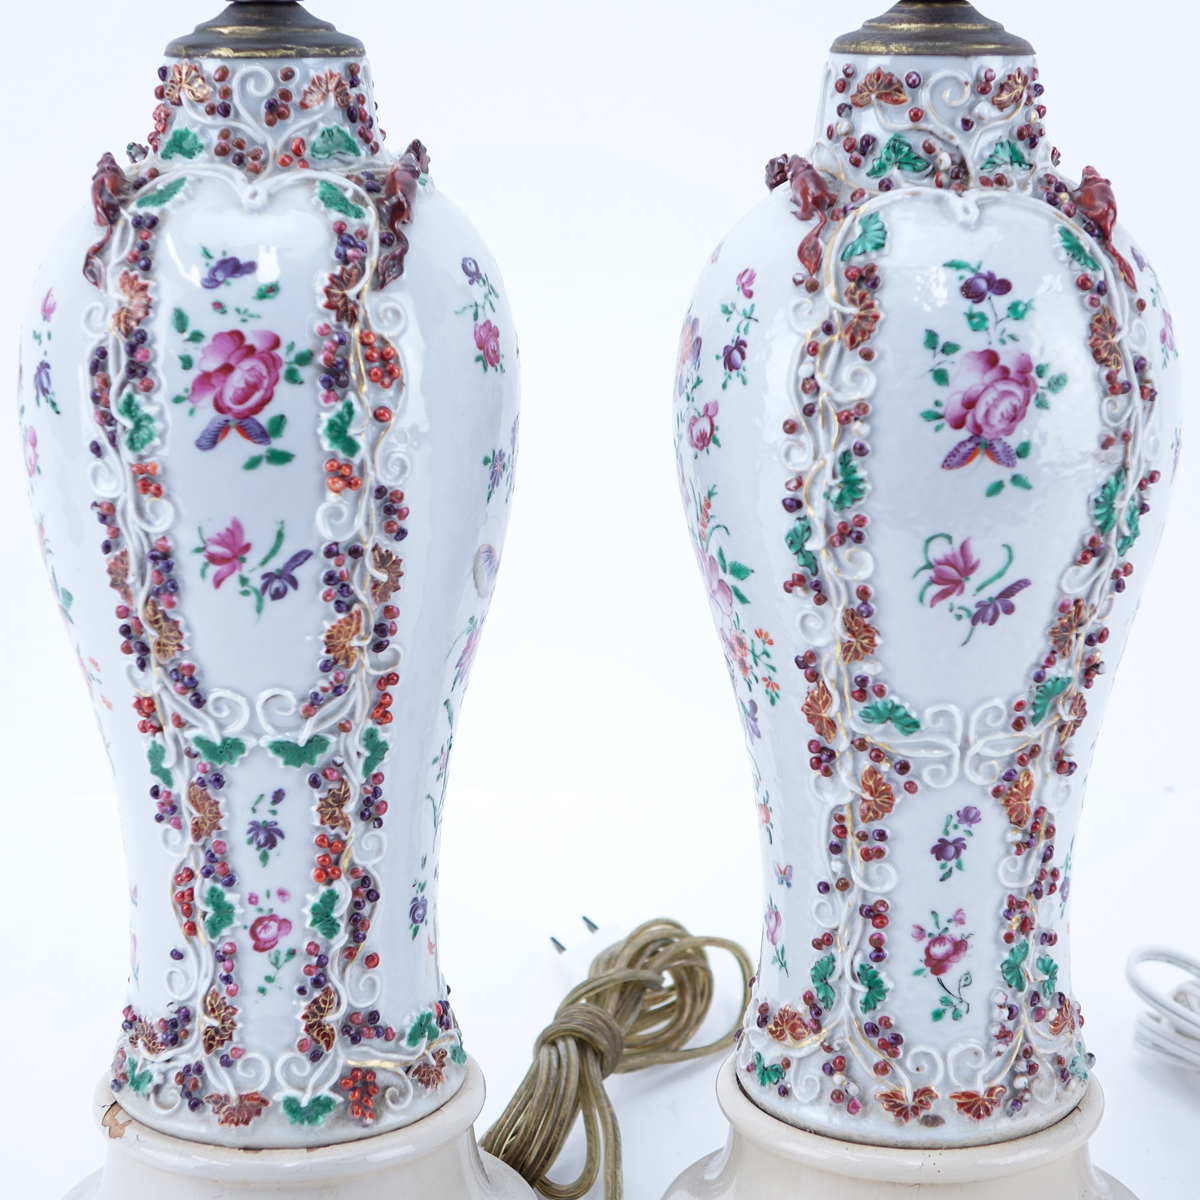 Pair of Samson Raised Floral Relief Porcelain Lamps. Typical rubbing to paint, some small nicks.